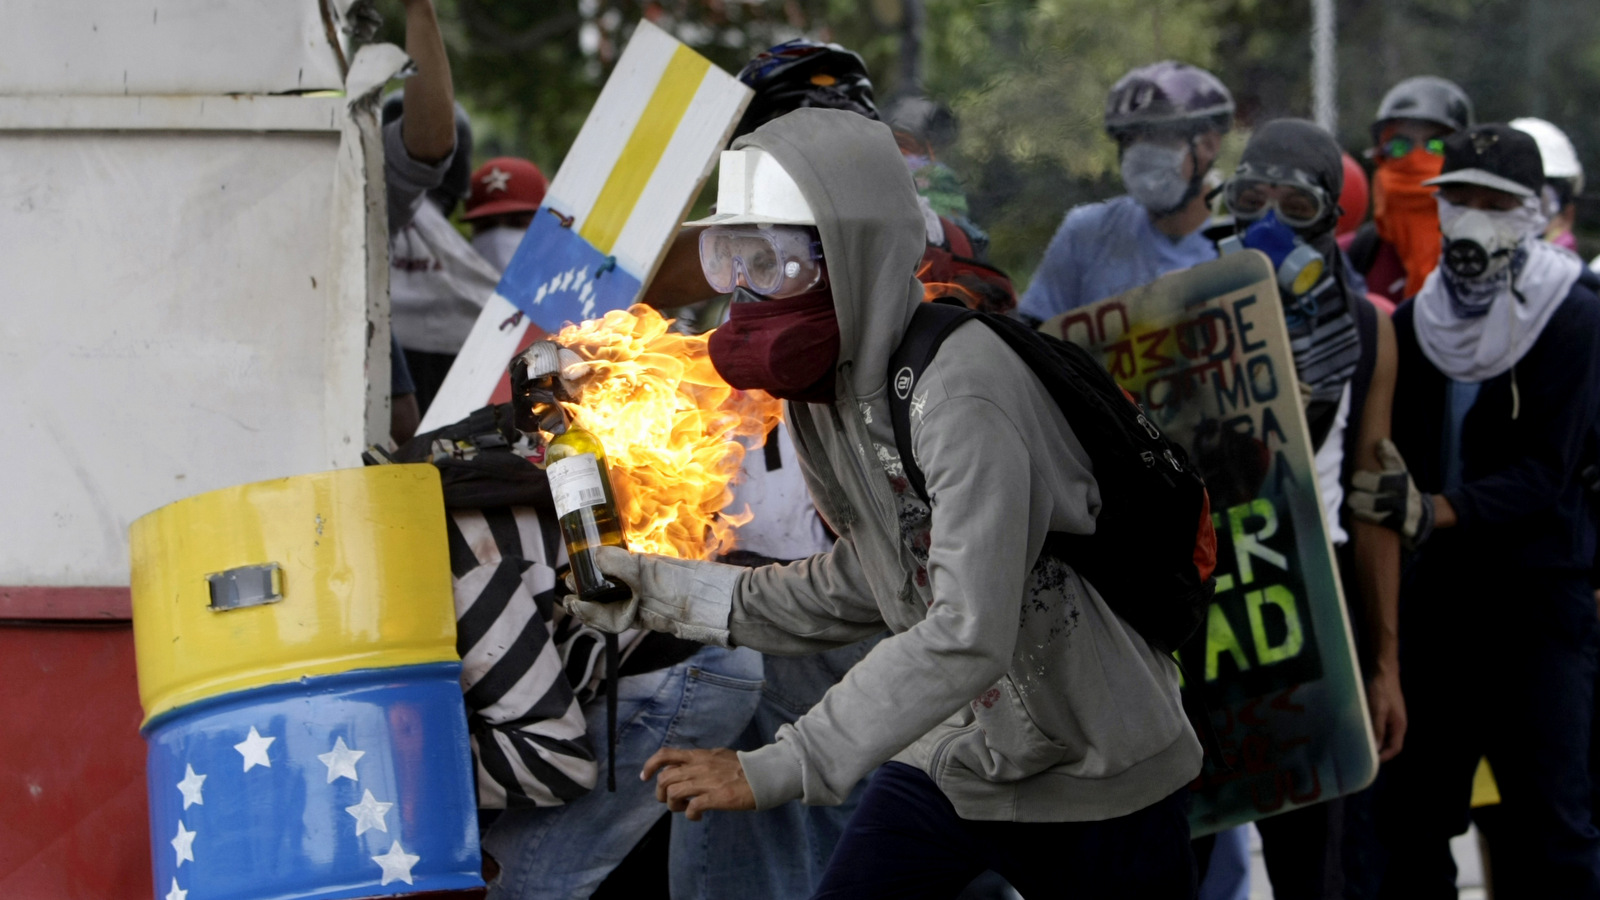 A demonstrators readies a gas bomb as he prepares to throw it at the police during clashes between police and anti-government demonstrators in Caracas, Venezuela, June 7, 2017. The clashes have claimed more than 60 lives as they enter their third month. (AP/Fernando Llano)